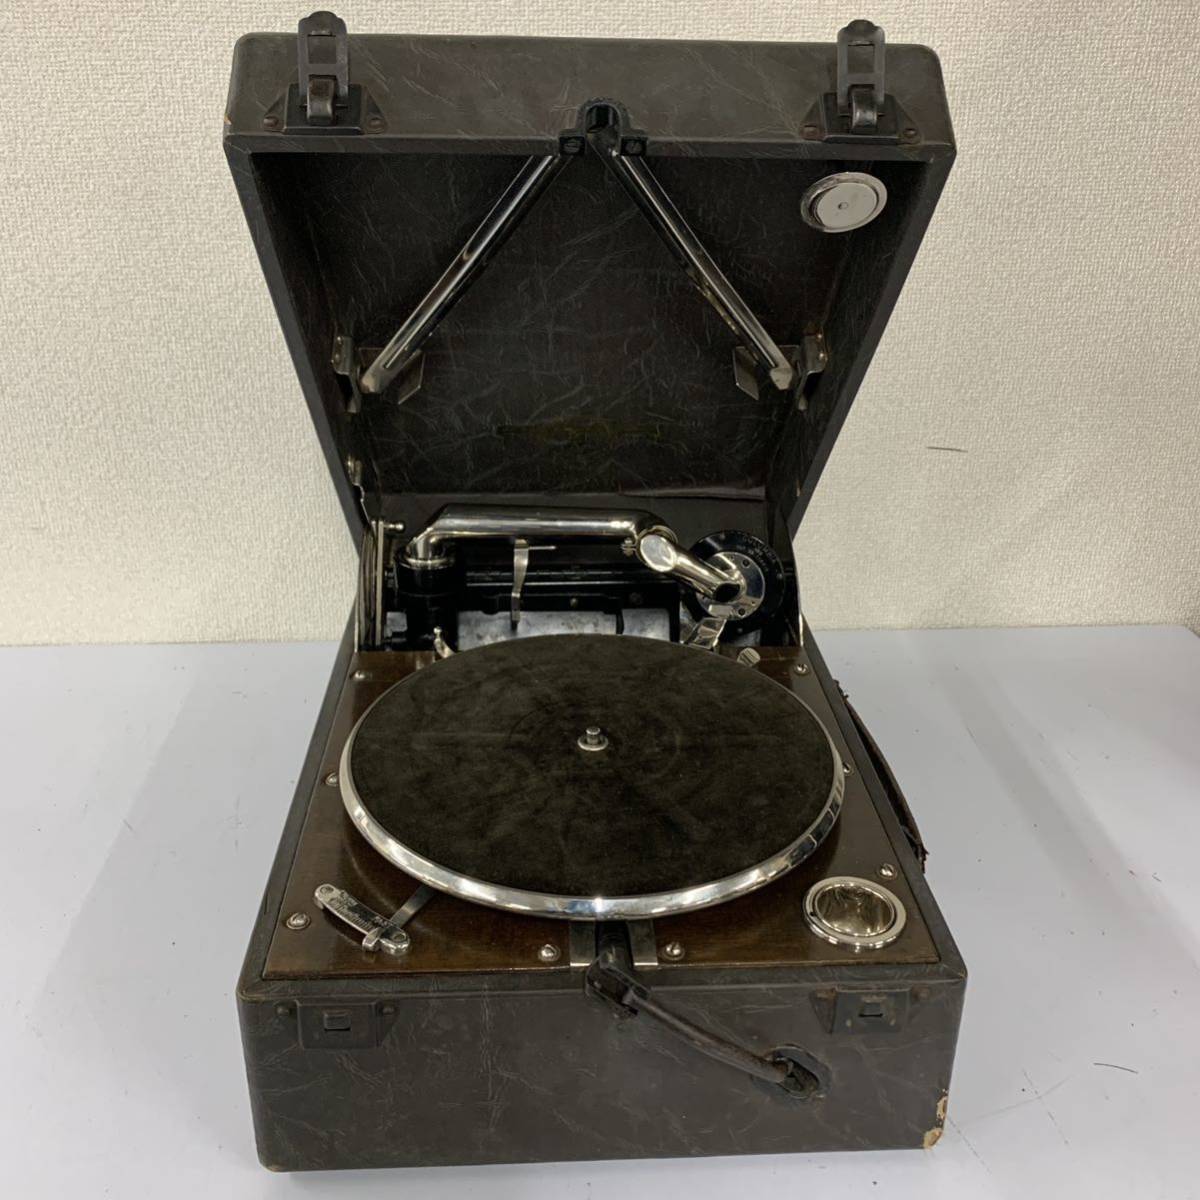 [L-1] Colombia gramophone No9 PAT no114413 gramophone operation verification settled needle included secondhand goods antique 991-164